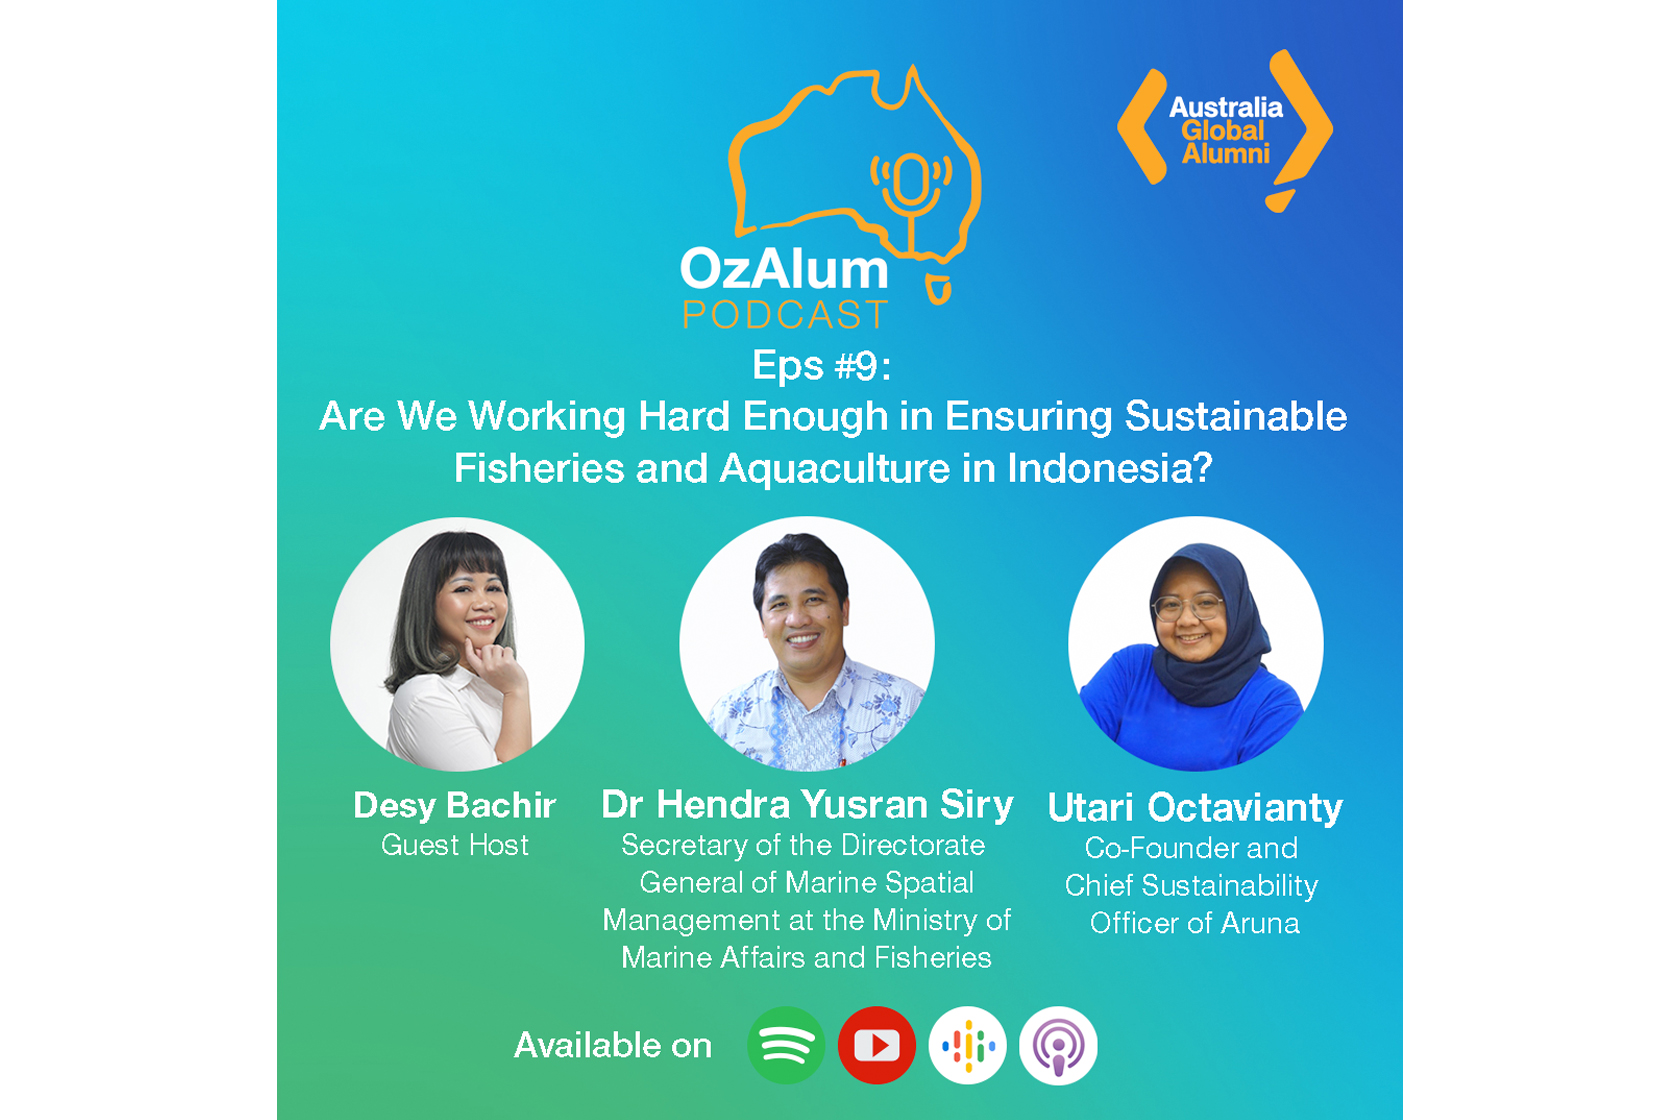 OzAlum Podcast Ep #9: Are We Working Hard Enough in Ensuring Sustainable Fisheries & Aquaculture in Indonesia?